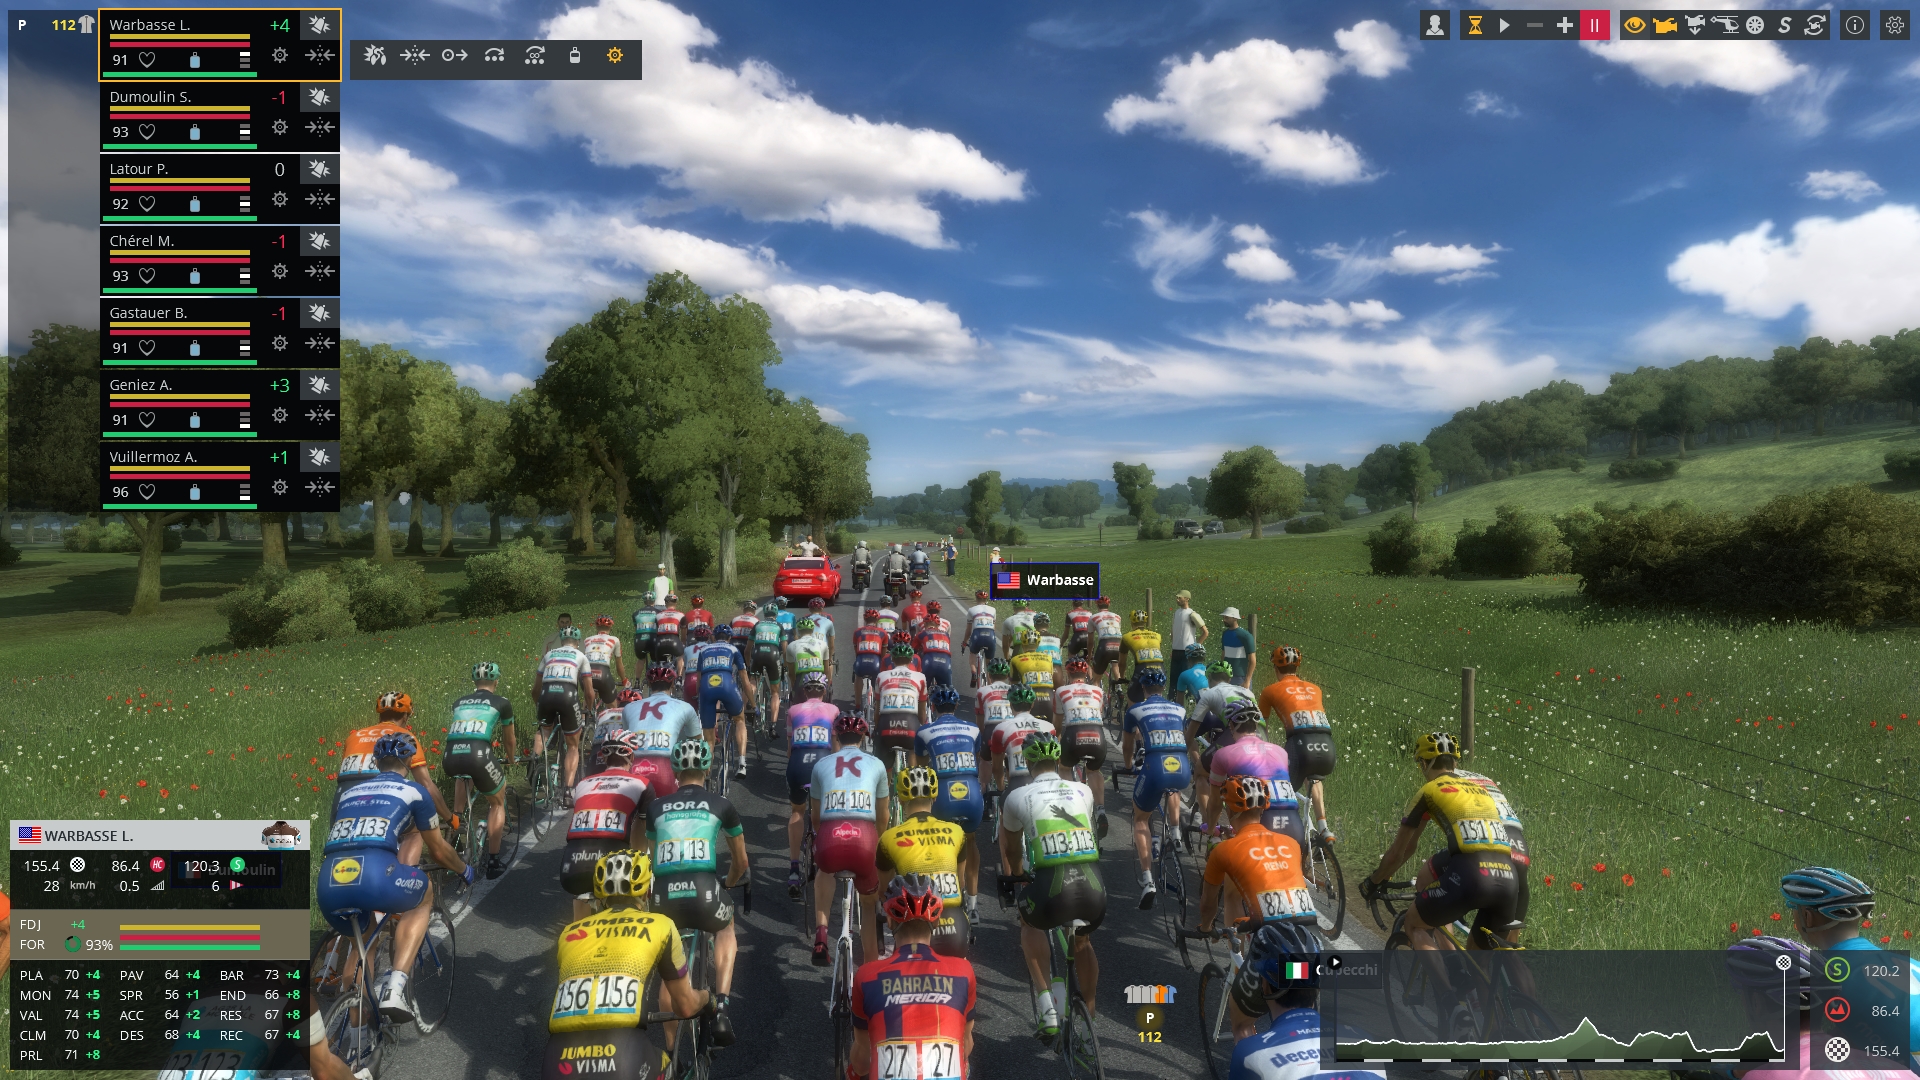 Pro Cycling Manager 2019 on Steam